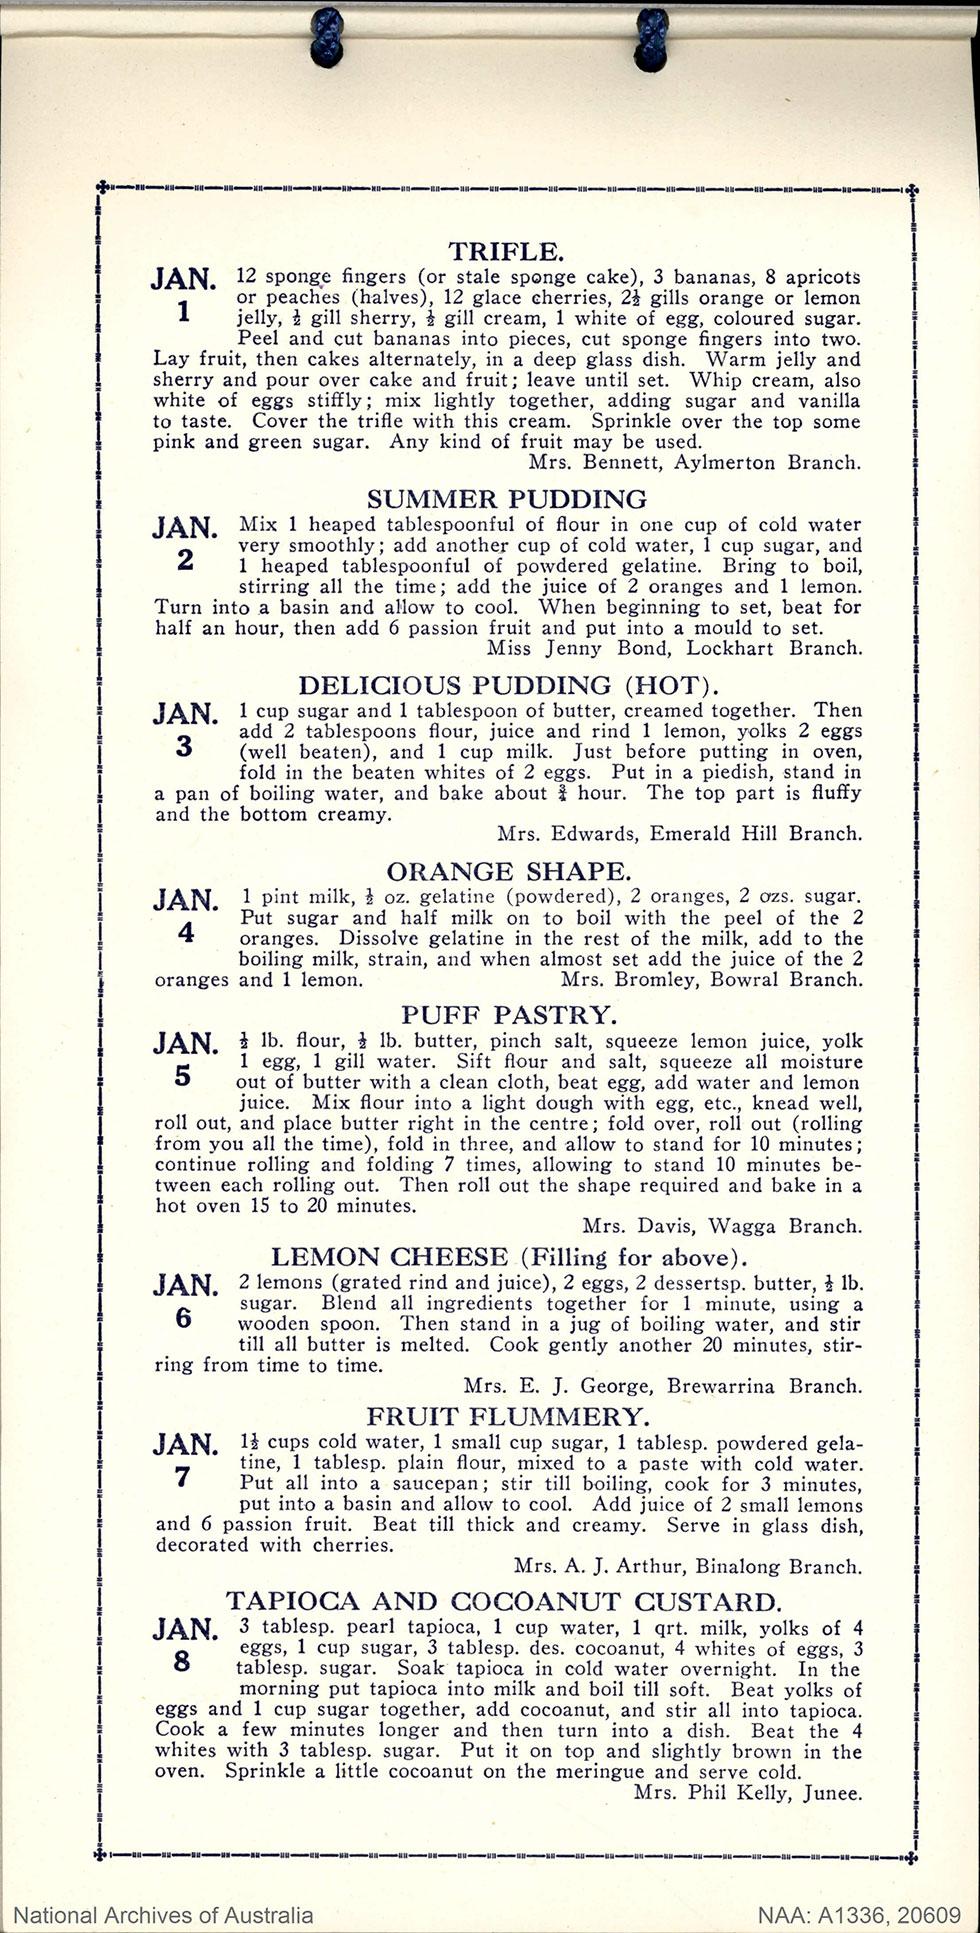 A sample of recipes from 1 January to 8 January.